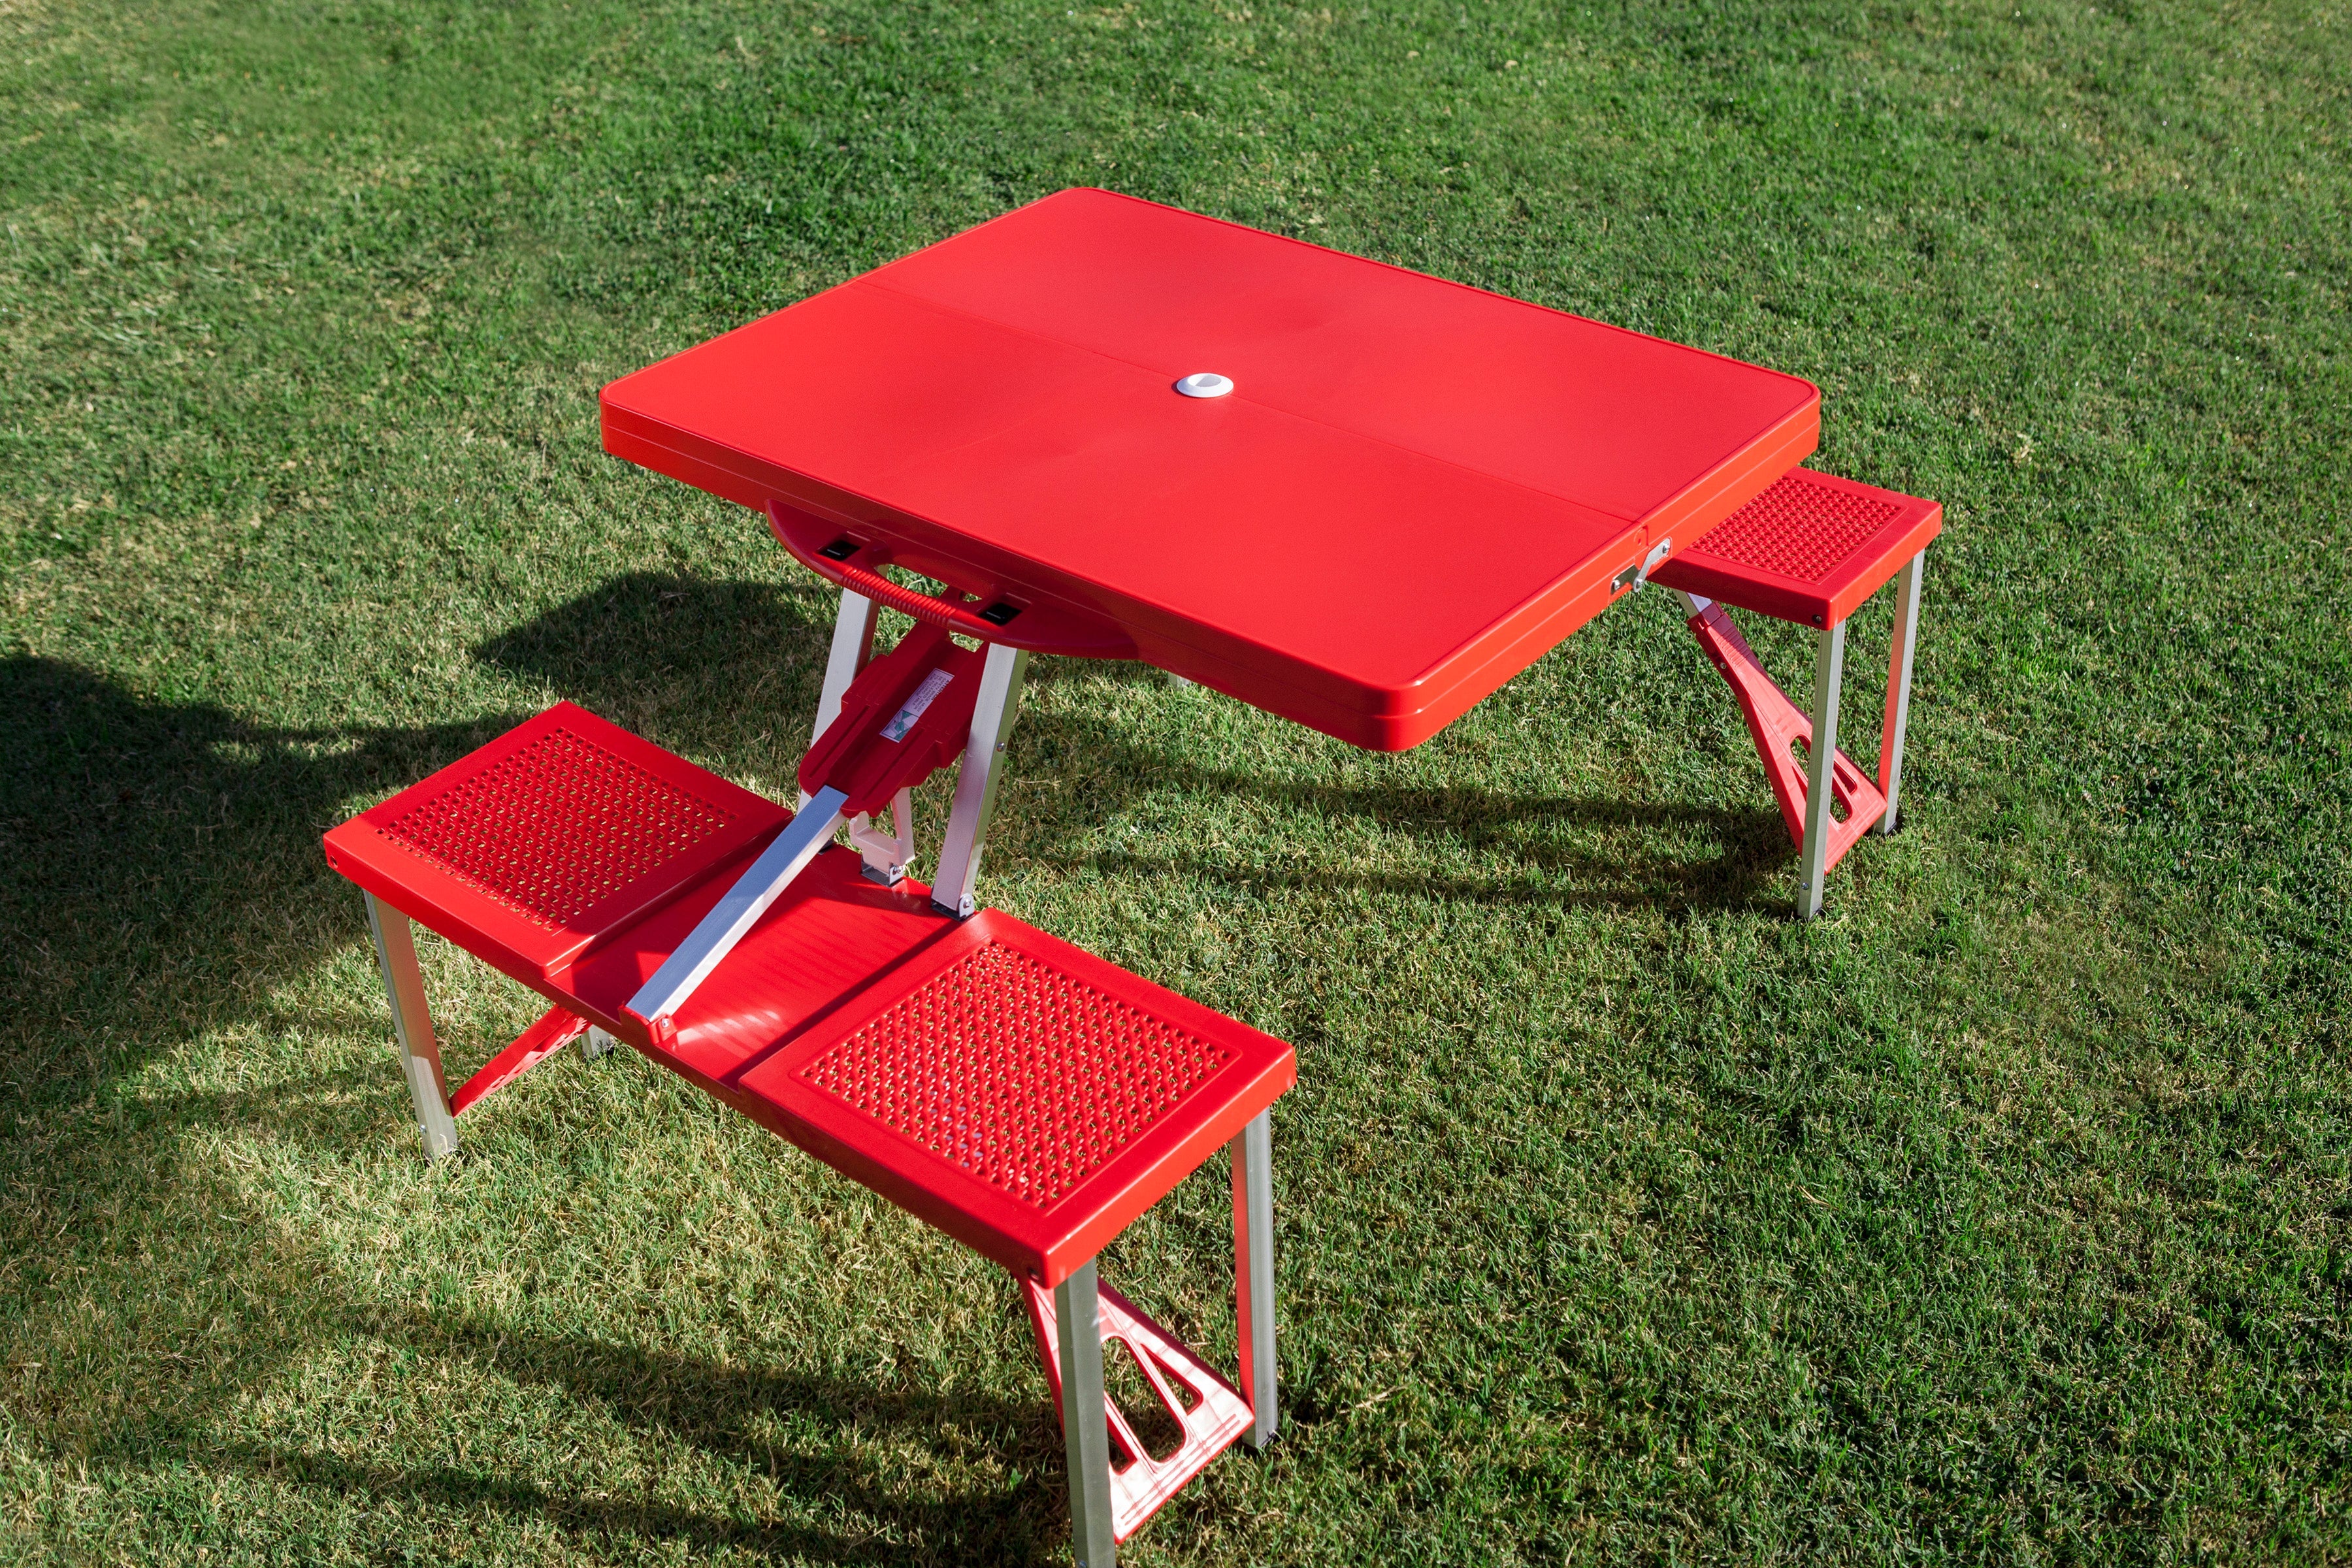 Football Field - Maryland Terrapins - Picnic Table Portable Folding Table with Seats